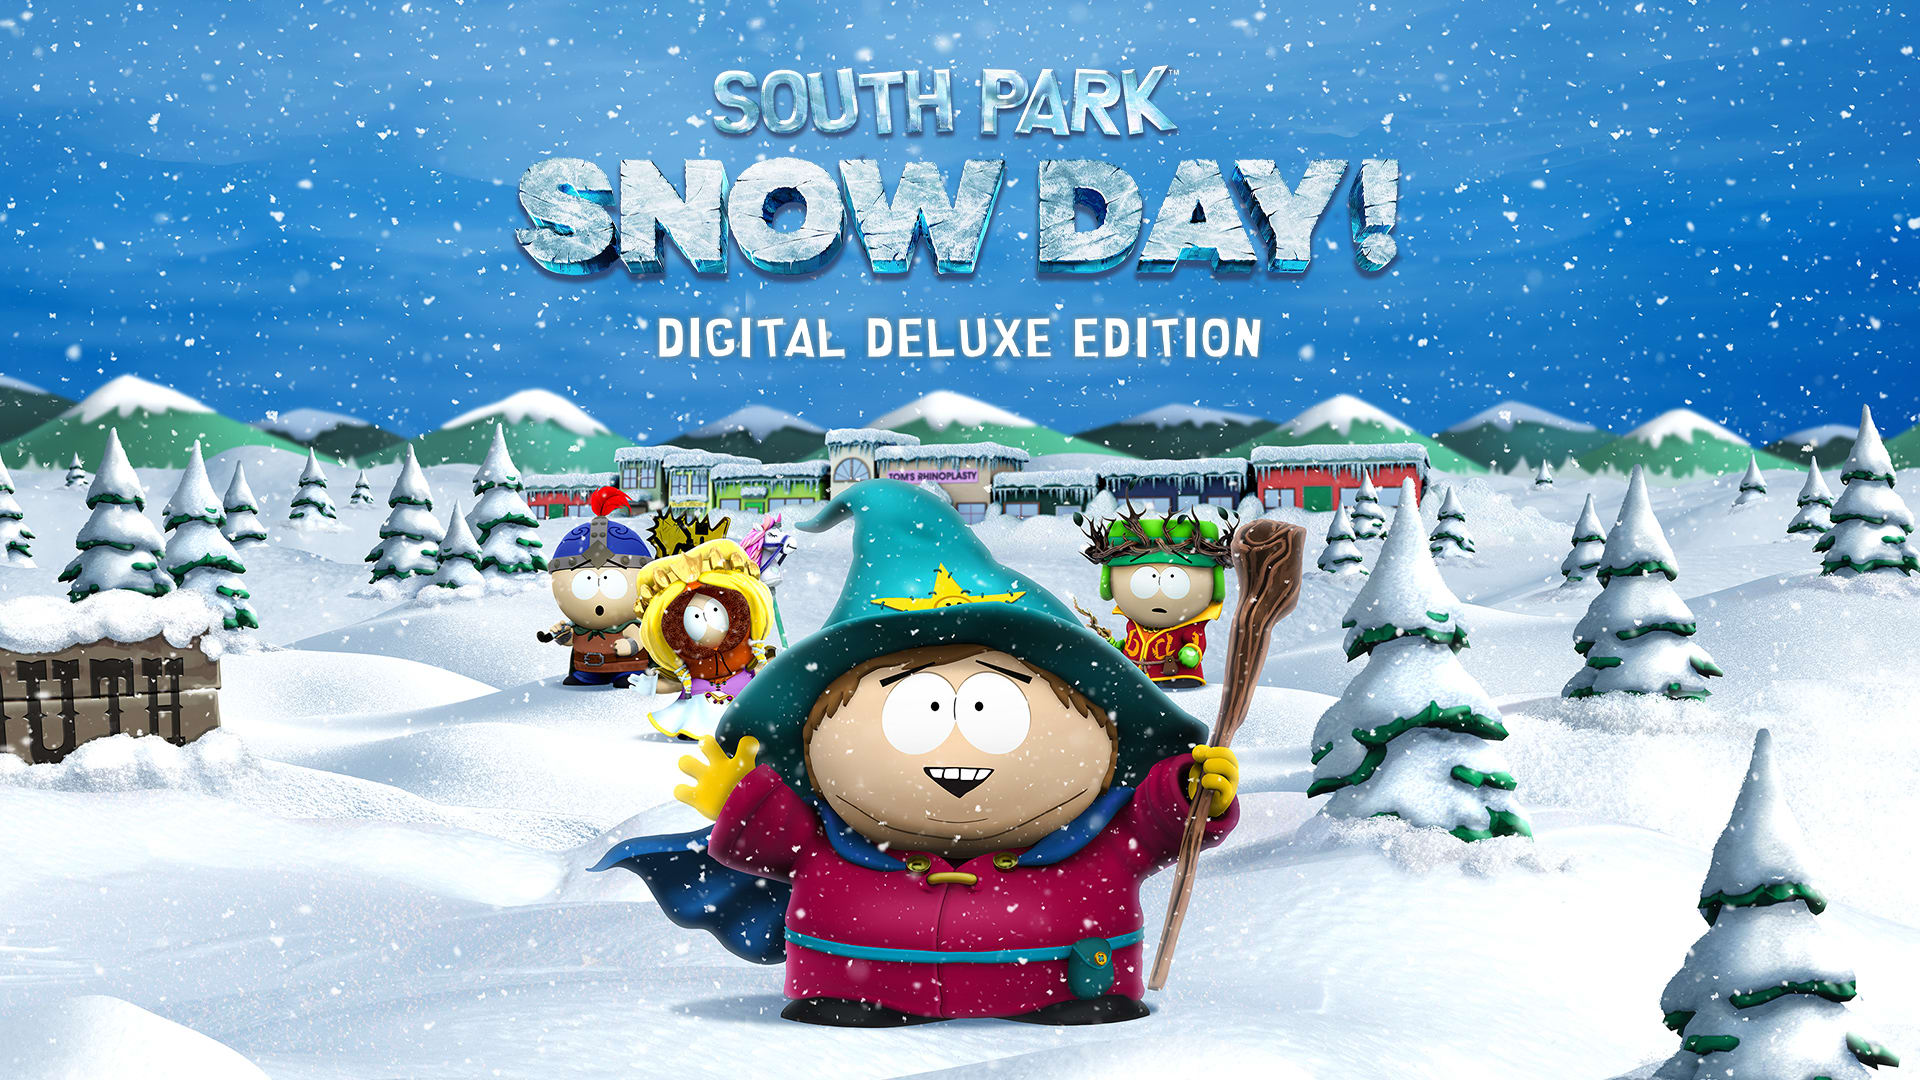 SOUTH PARK: SNOW DAY! Digital Deluxe 1